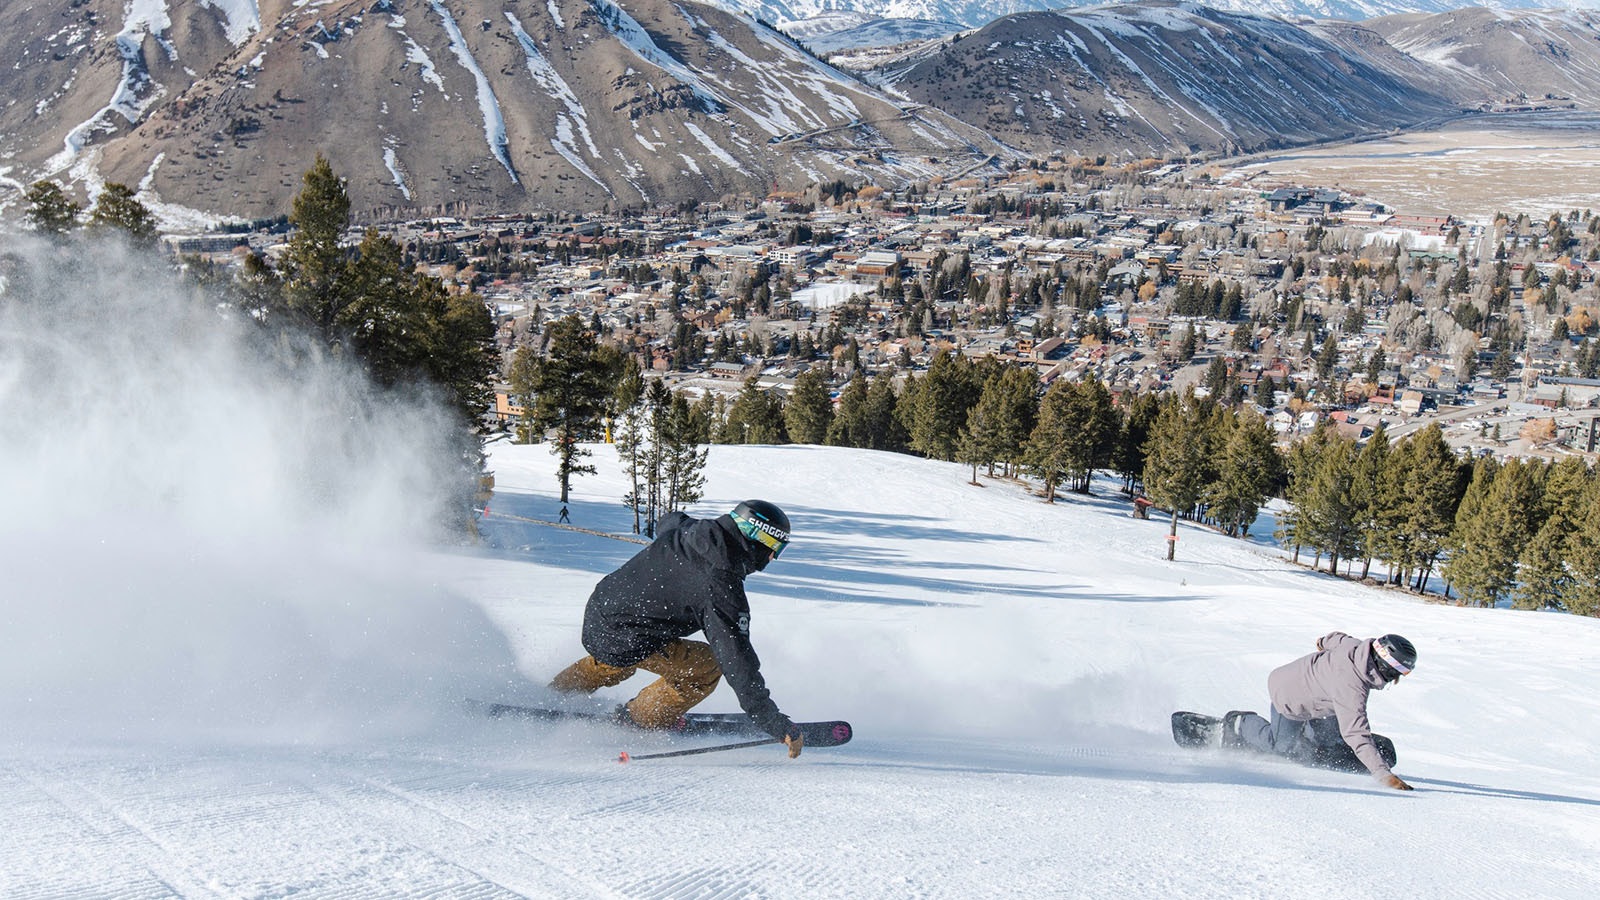 Outdoor recreation around Jackson and Teton County is driving the area to be tops in the nation for its economic boom. Here, a skier and snowboarder carve some snow on Snow King Mountain above Jackson, laid out below.